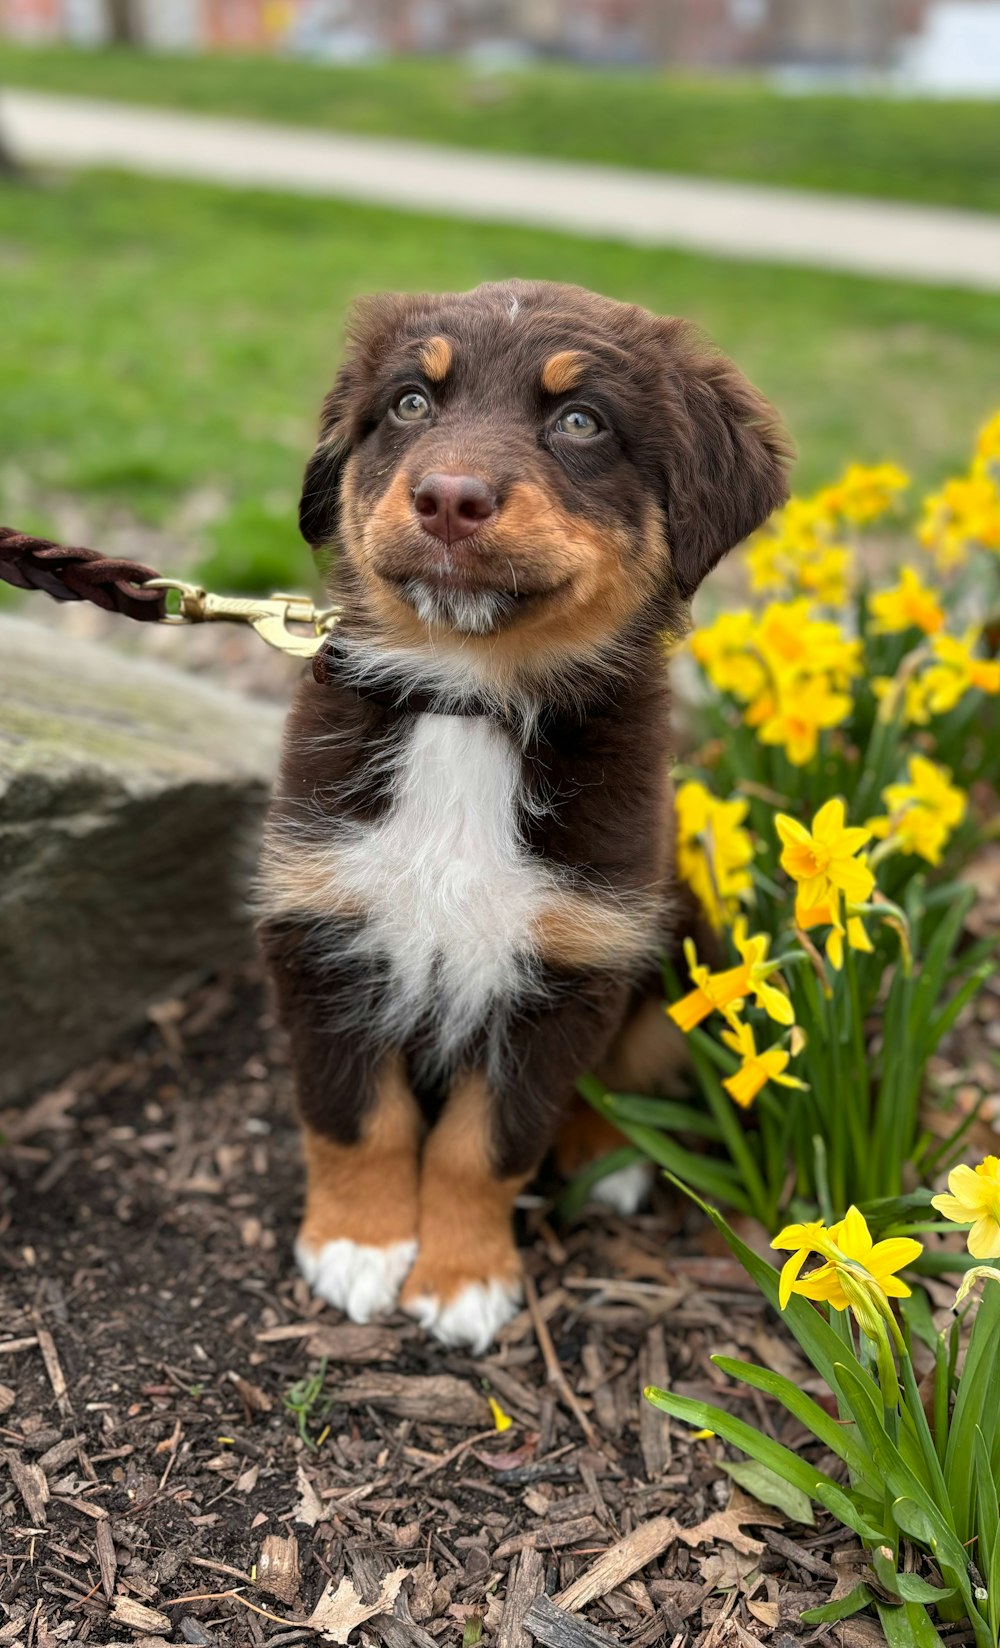 a puppy sitting in a flower bed with daffodils